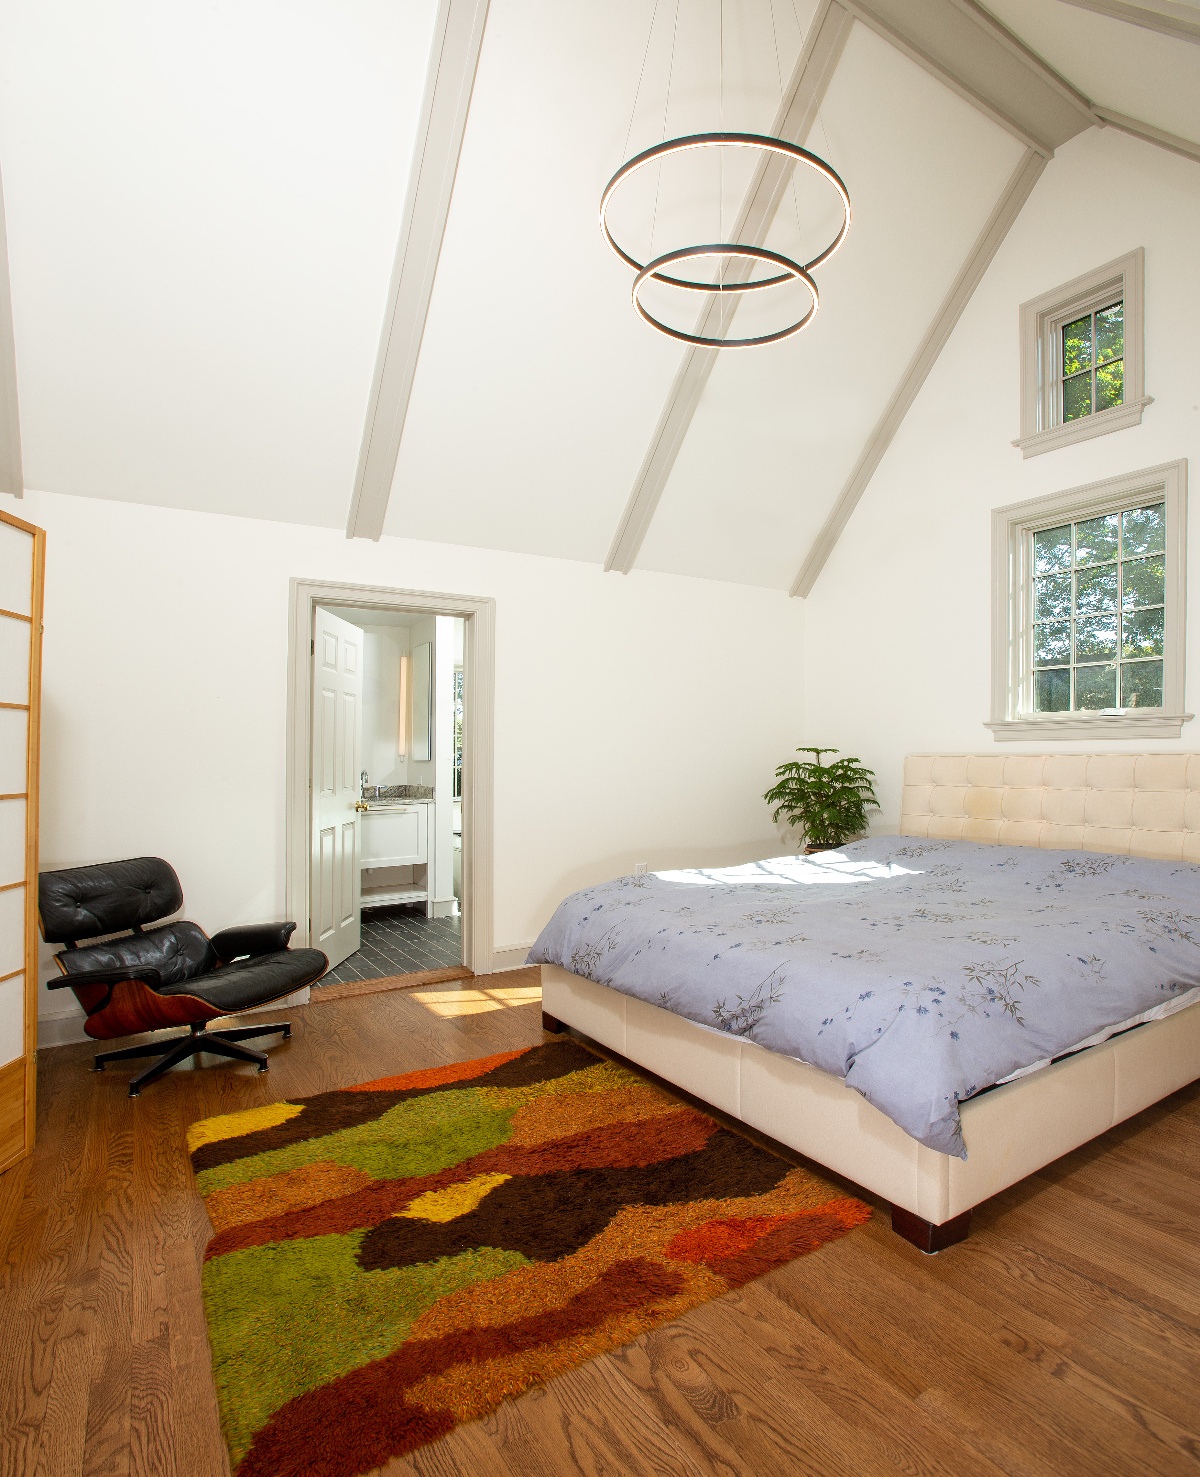 Bedroom with high-loft cathedral ceiling, elegant hanging light fixtures, and colored roof beams